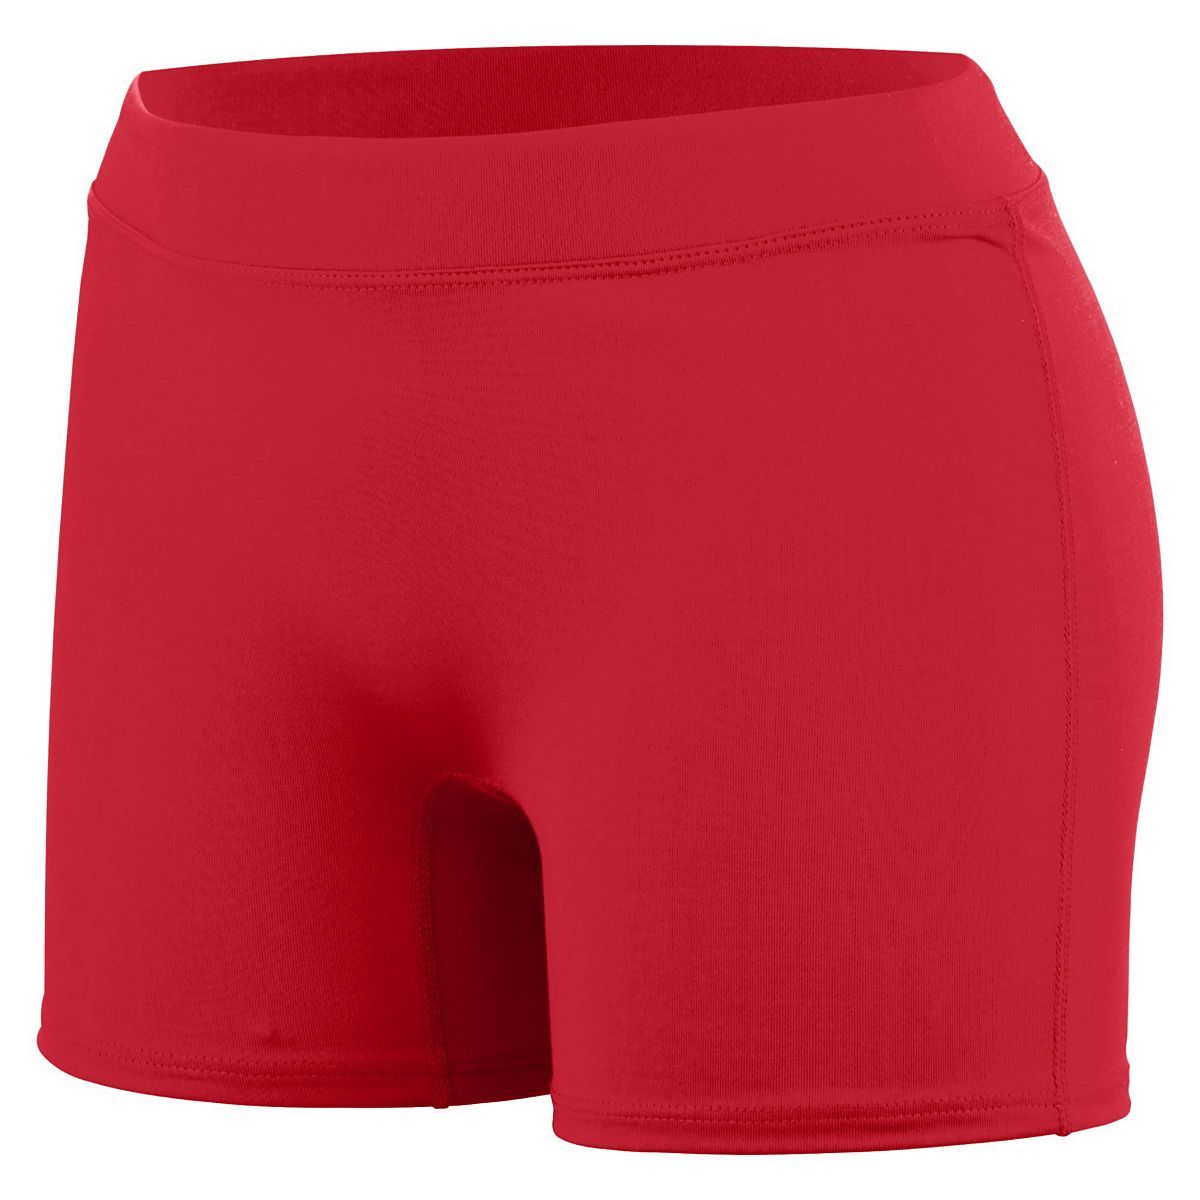 High 5 Girls Knock Out Shorts in Scarlet  -Part of the Girls, High5-Products, Volleyball, Girls-Shorts product lines at KanaleyCreations.com